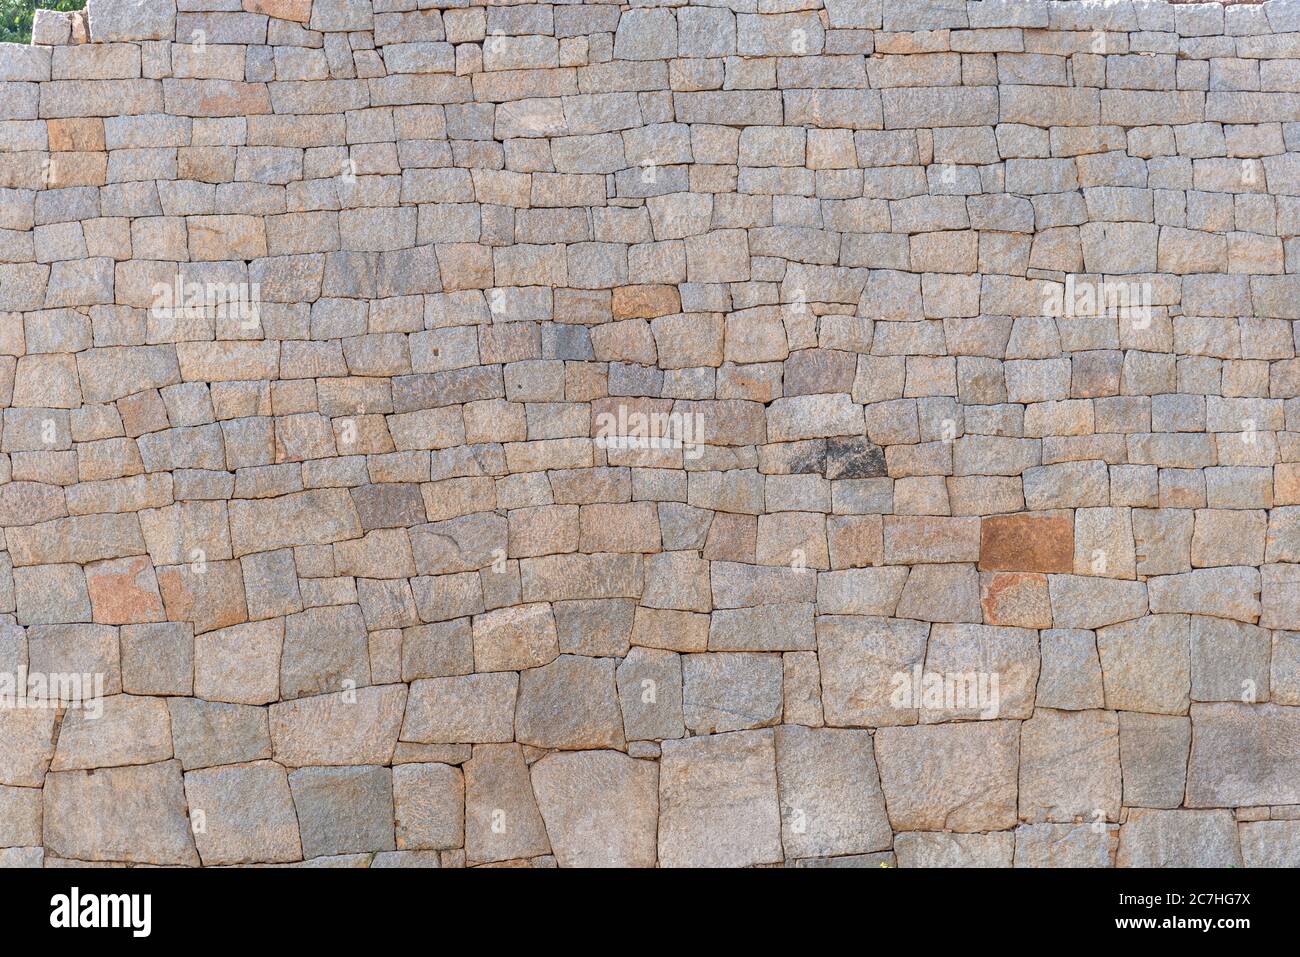 Stones in a well-preserved Indian temple wall Stock Photo